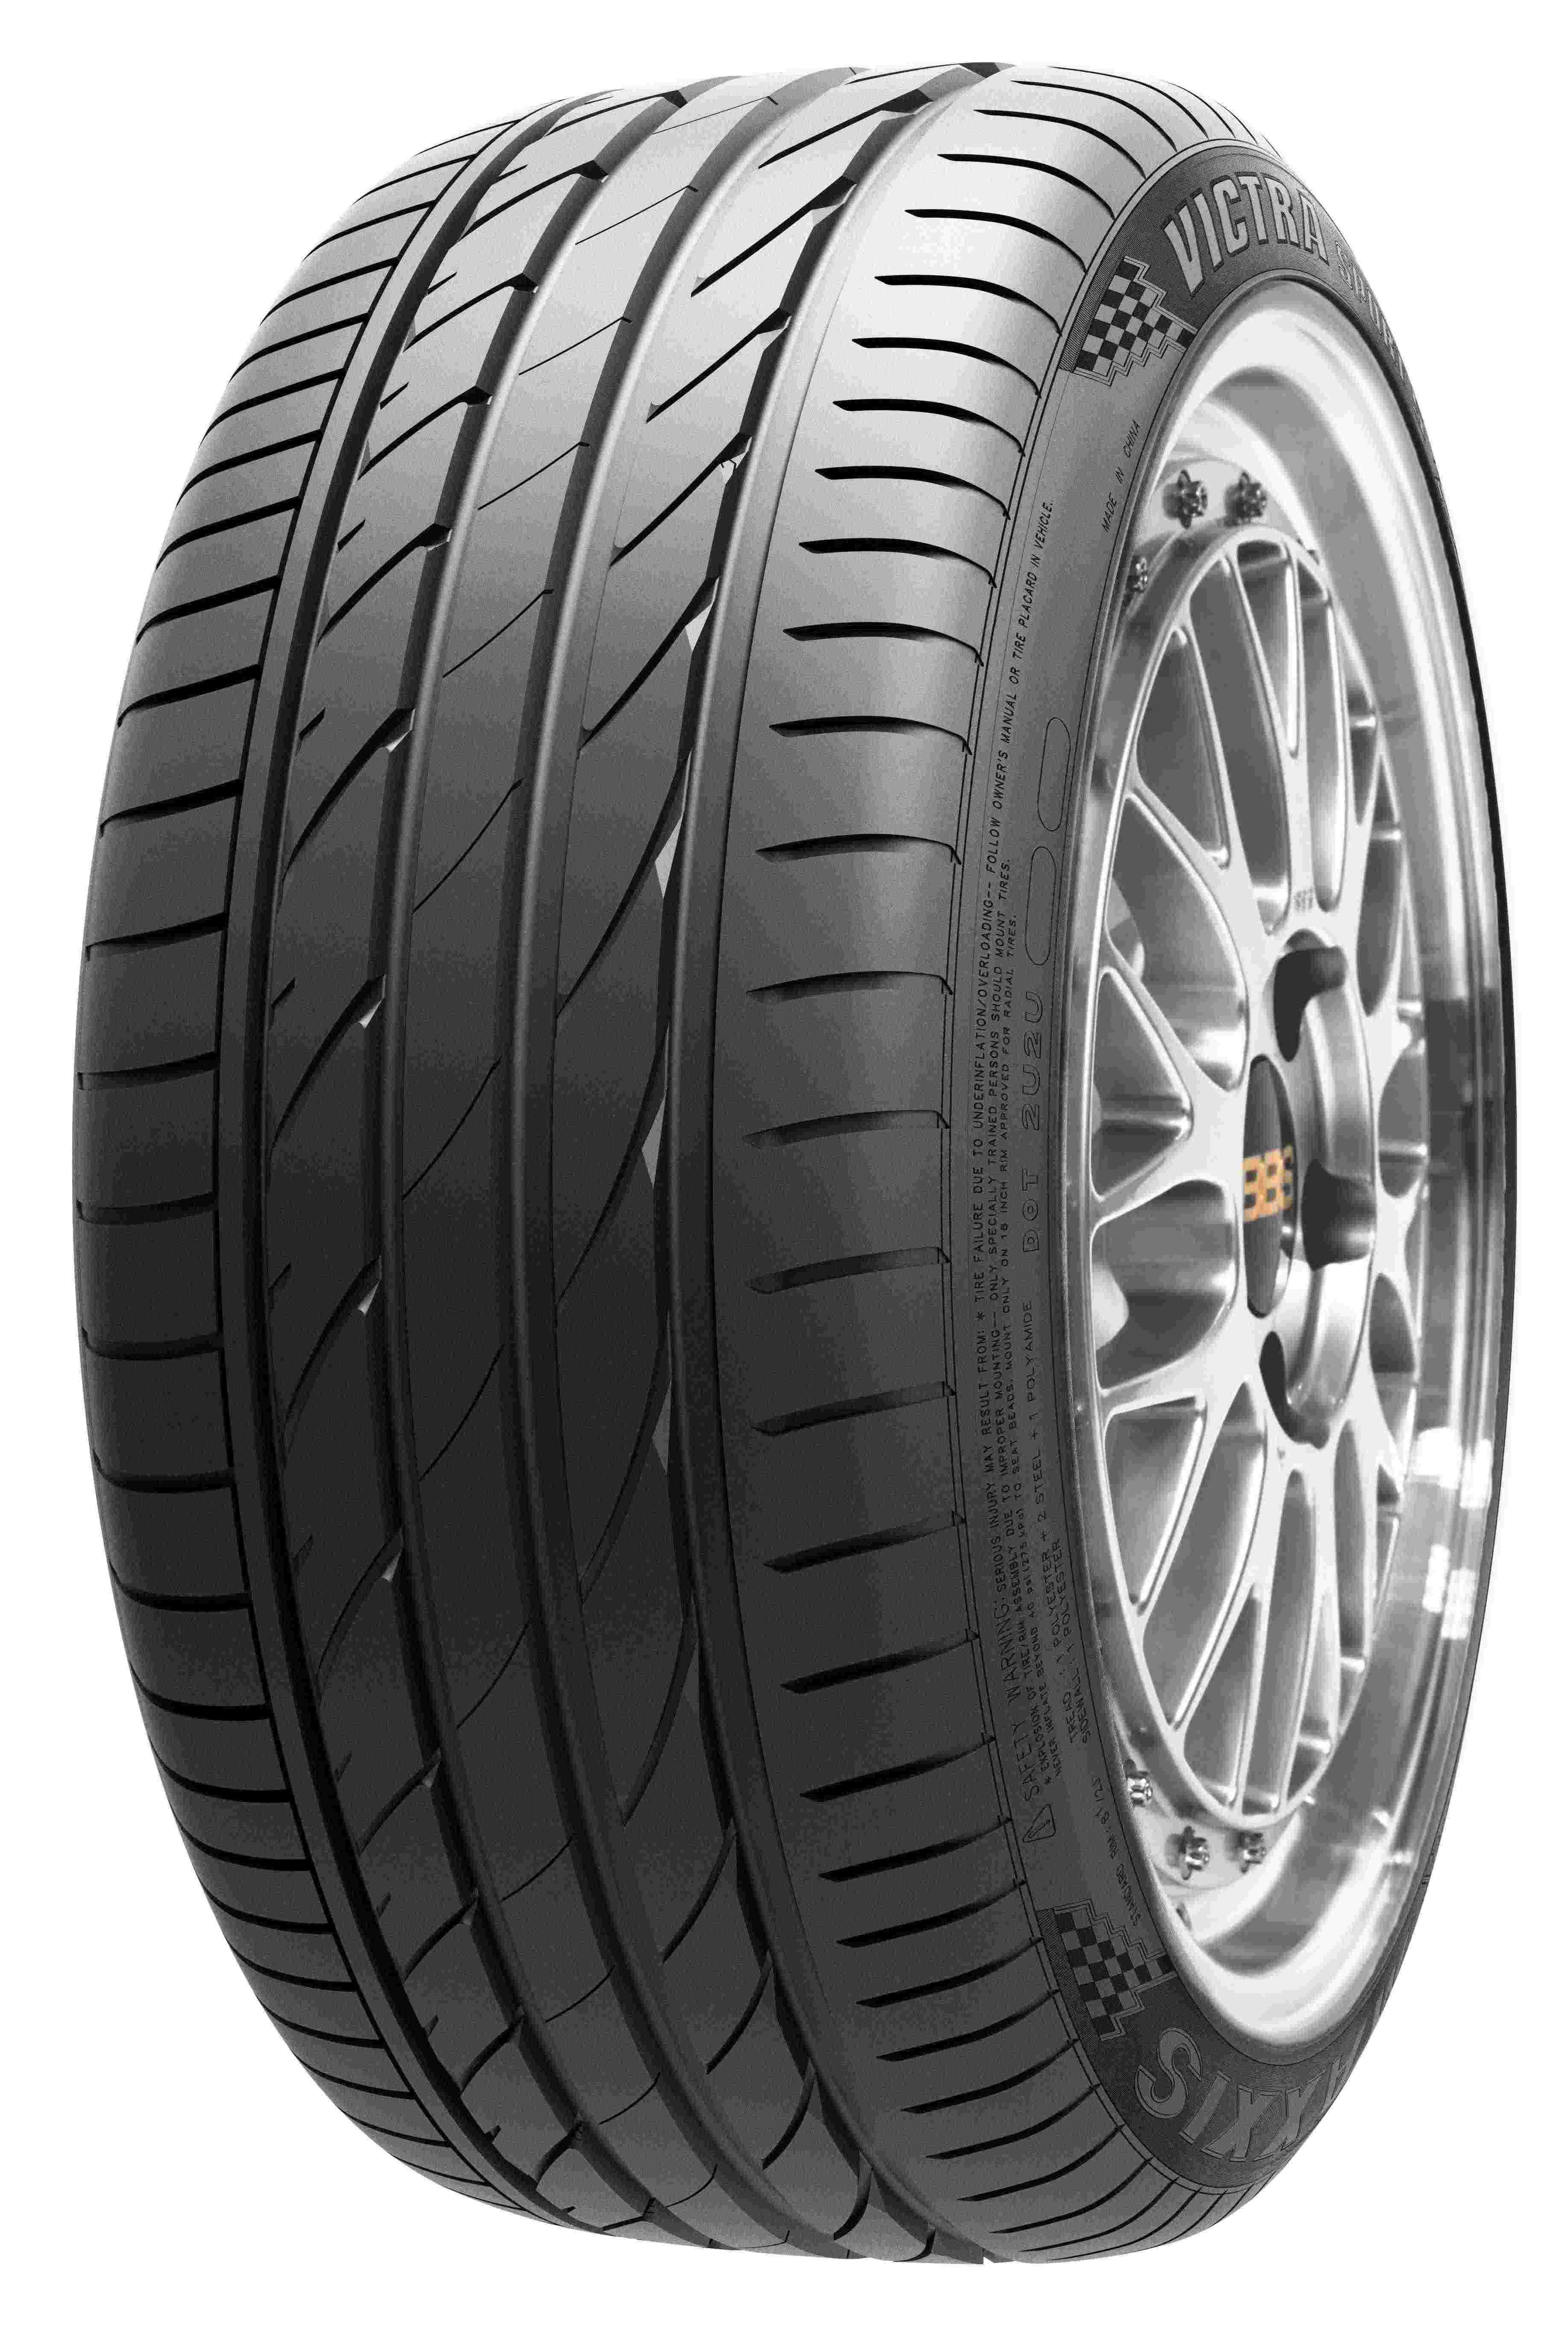 Maxxis victra sport 5 r20. Maxxis vs5 Victra. Maxxis Victra Sport 5. Maxxis vs5 Victra SUV. Maxxis Victra Sport 5 SUV.